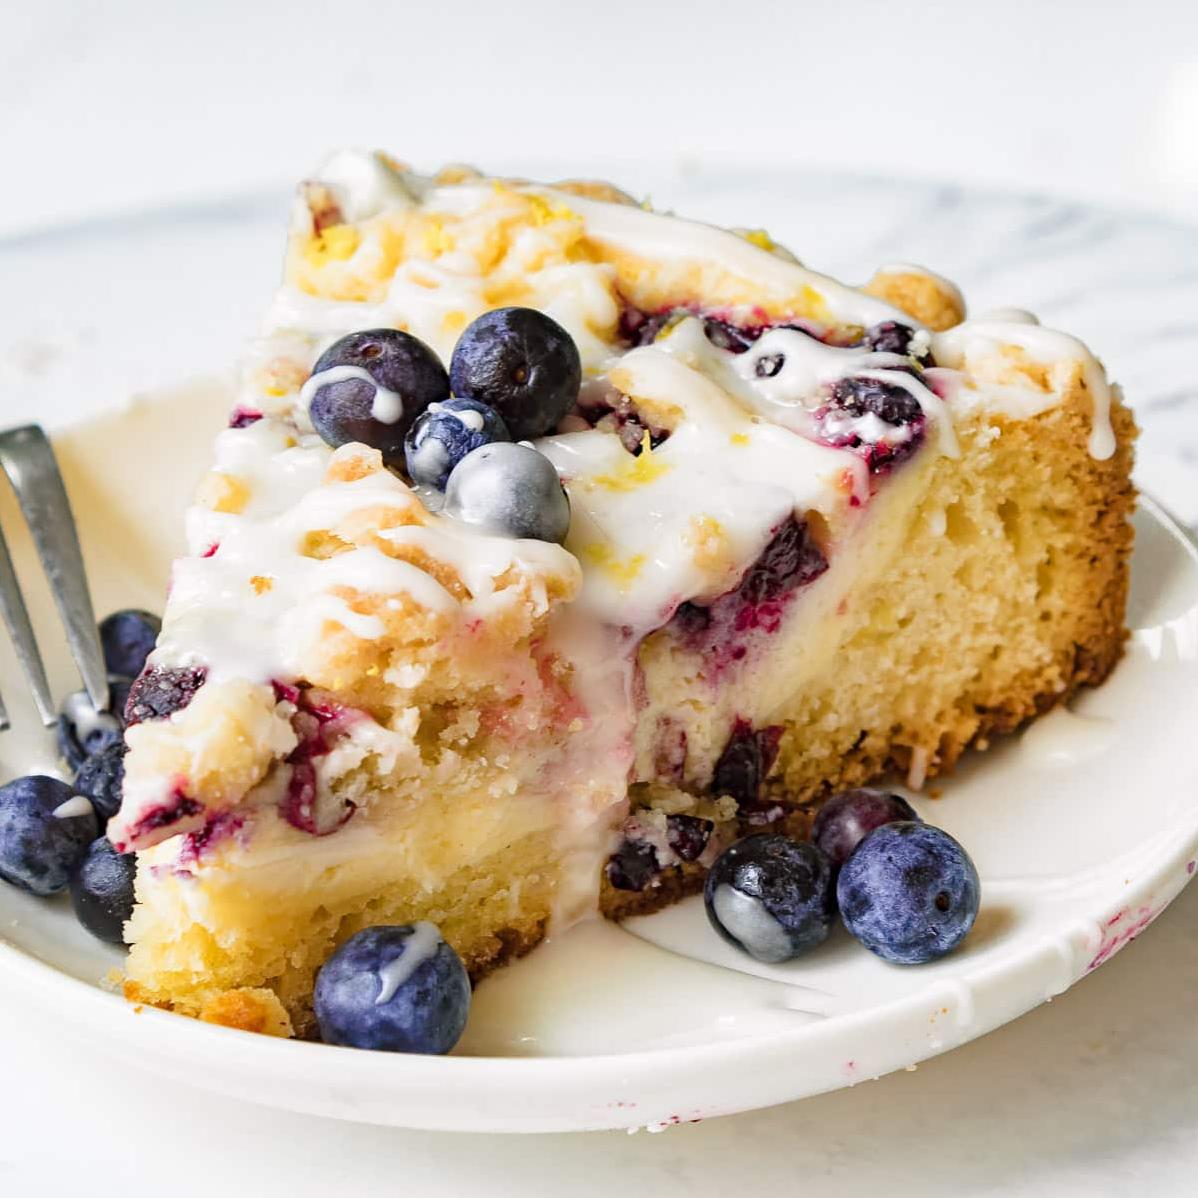  Let this cake be the berry on top of your day!